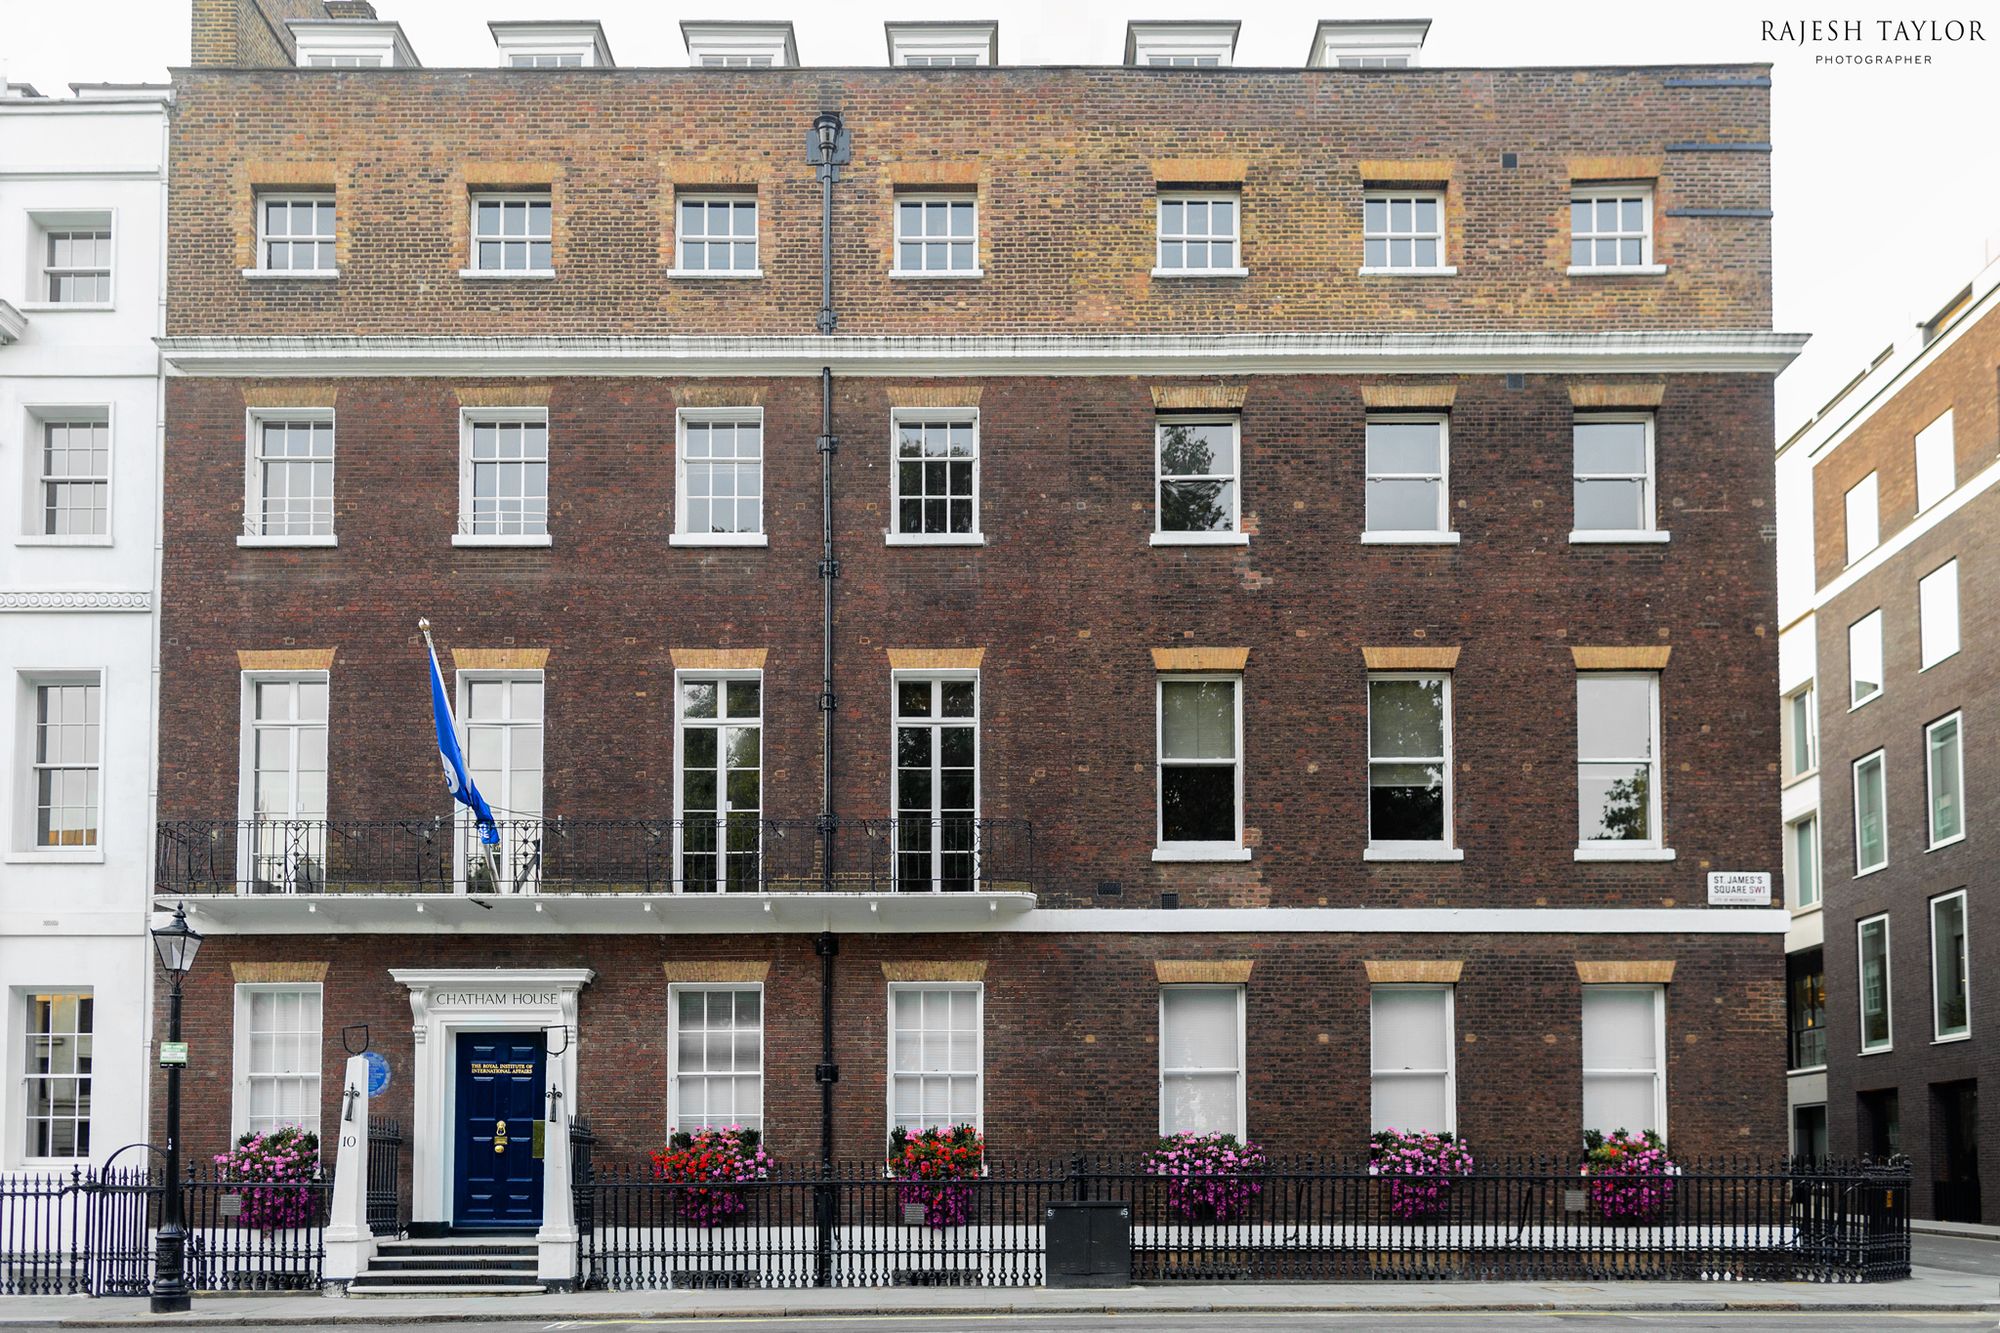 The Institute of International Affairs, Chatham House; 10 St James's Square. © Rajesh Taylor